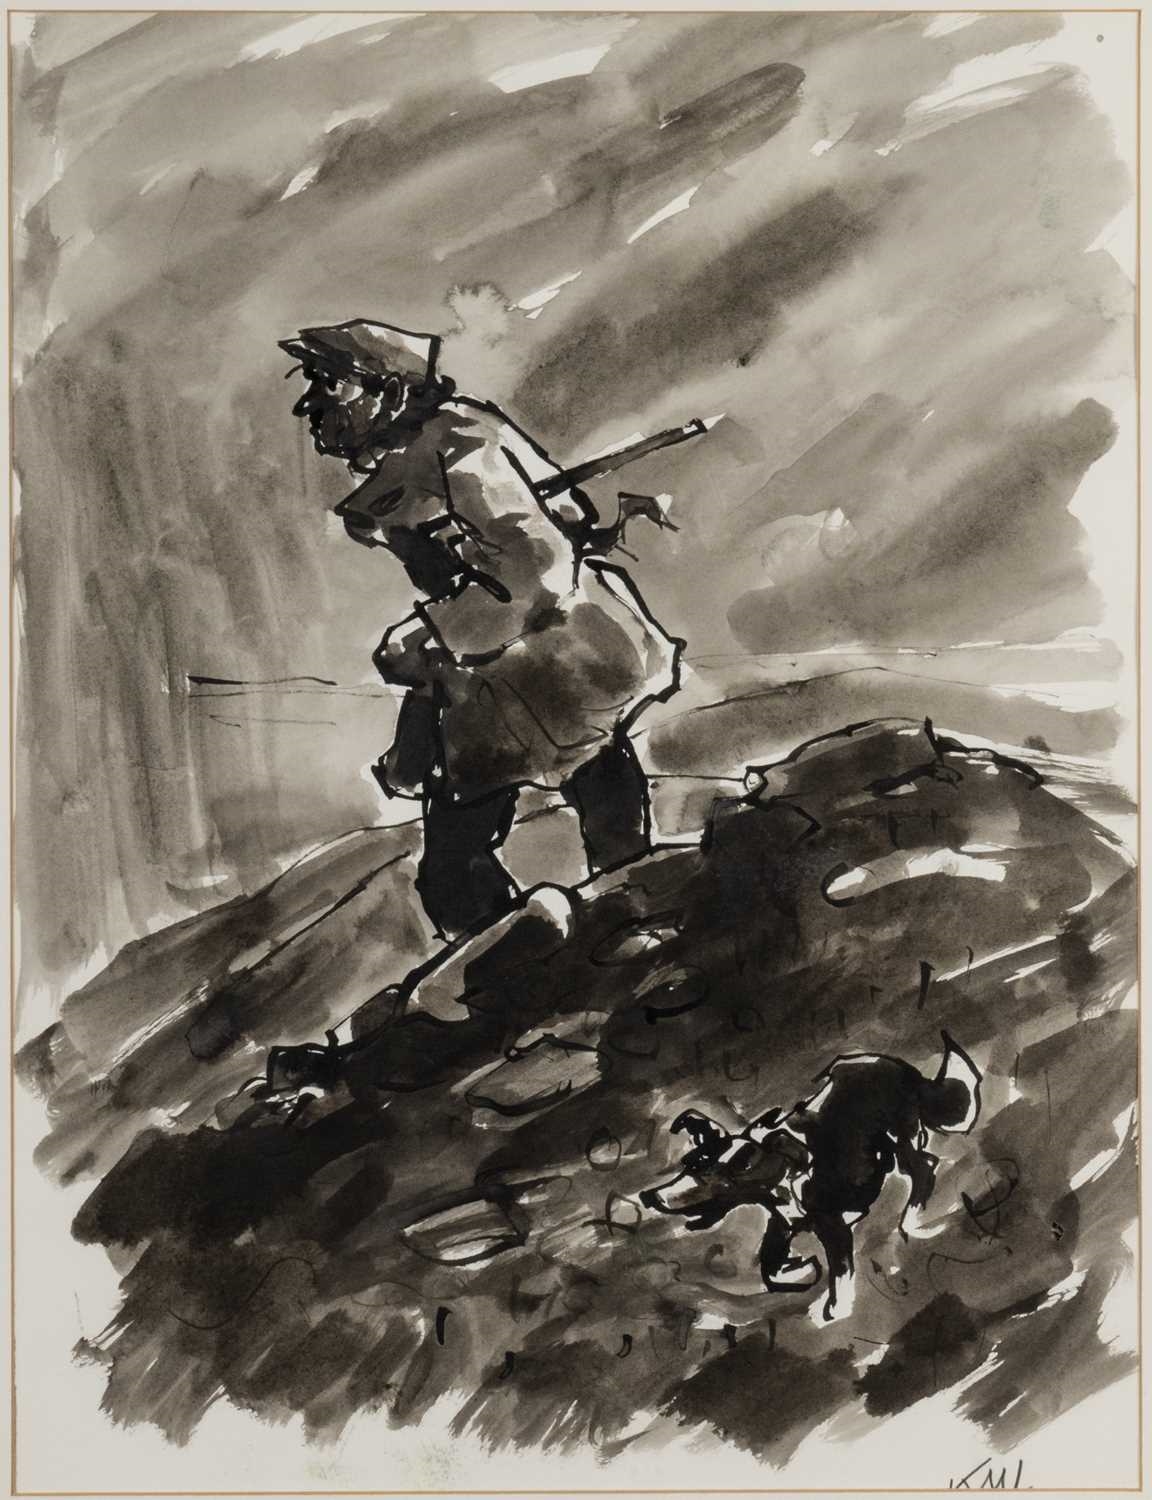 ‡ SIR KYFFIN WILLIAMS RA ink and wash - entitled verso 'Shepherd and Dog' on Oriel Tegfryn Gallery label